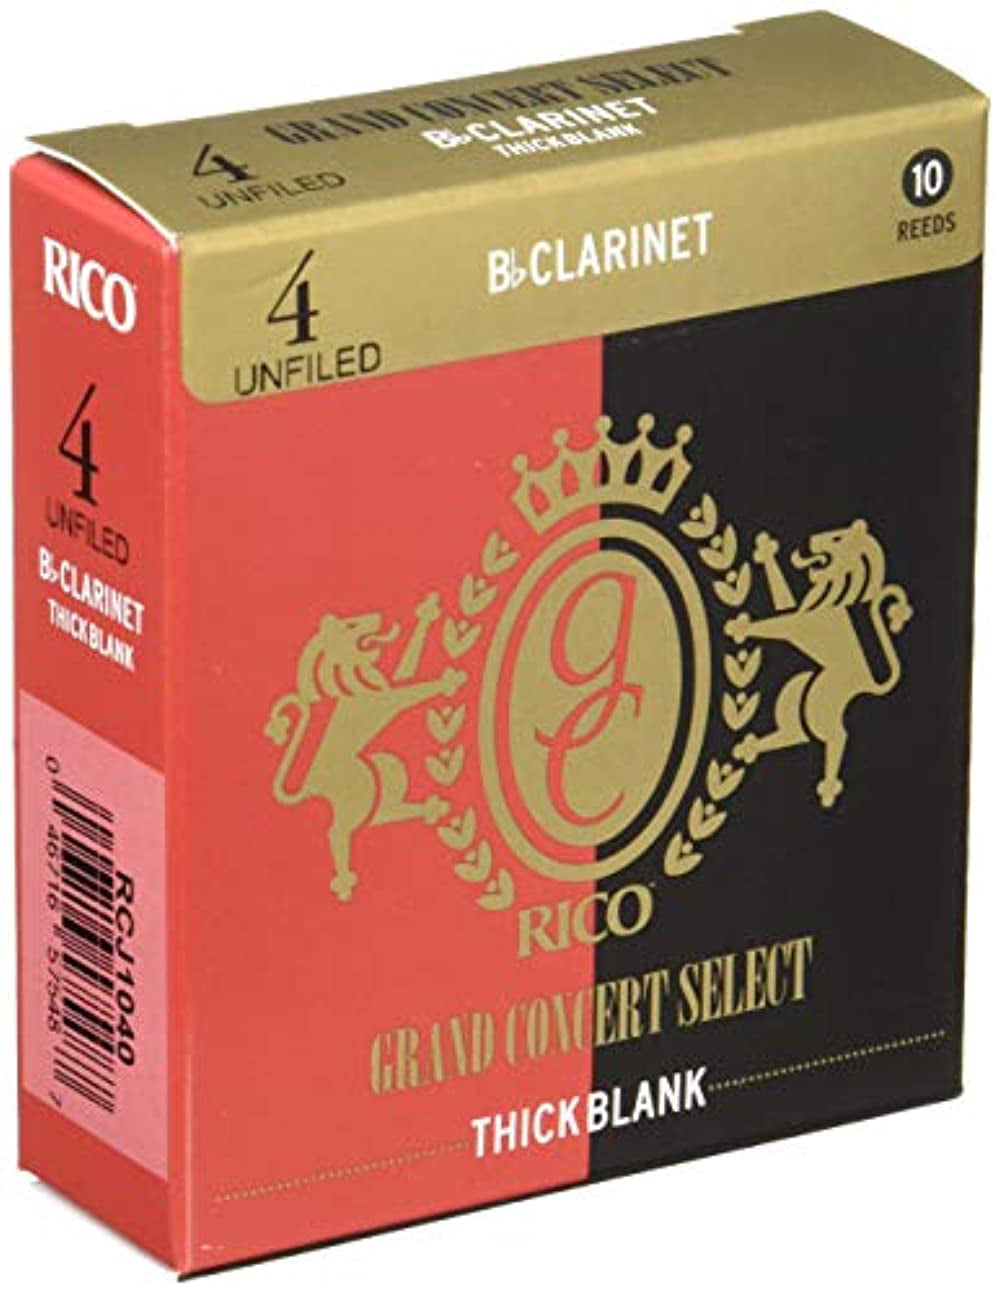 Unfiled Rico Grand Concert Select Thick Blank Bb Clarinet Reeds